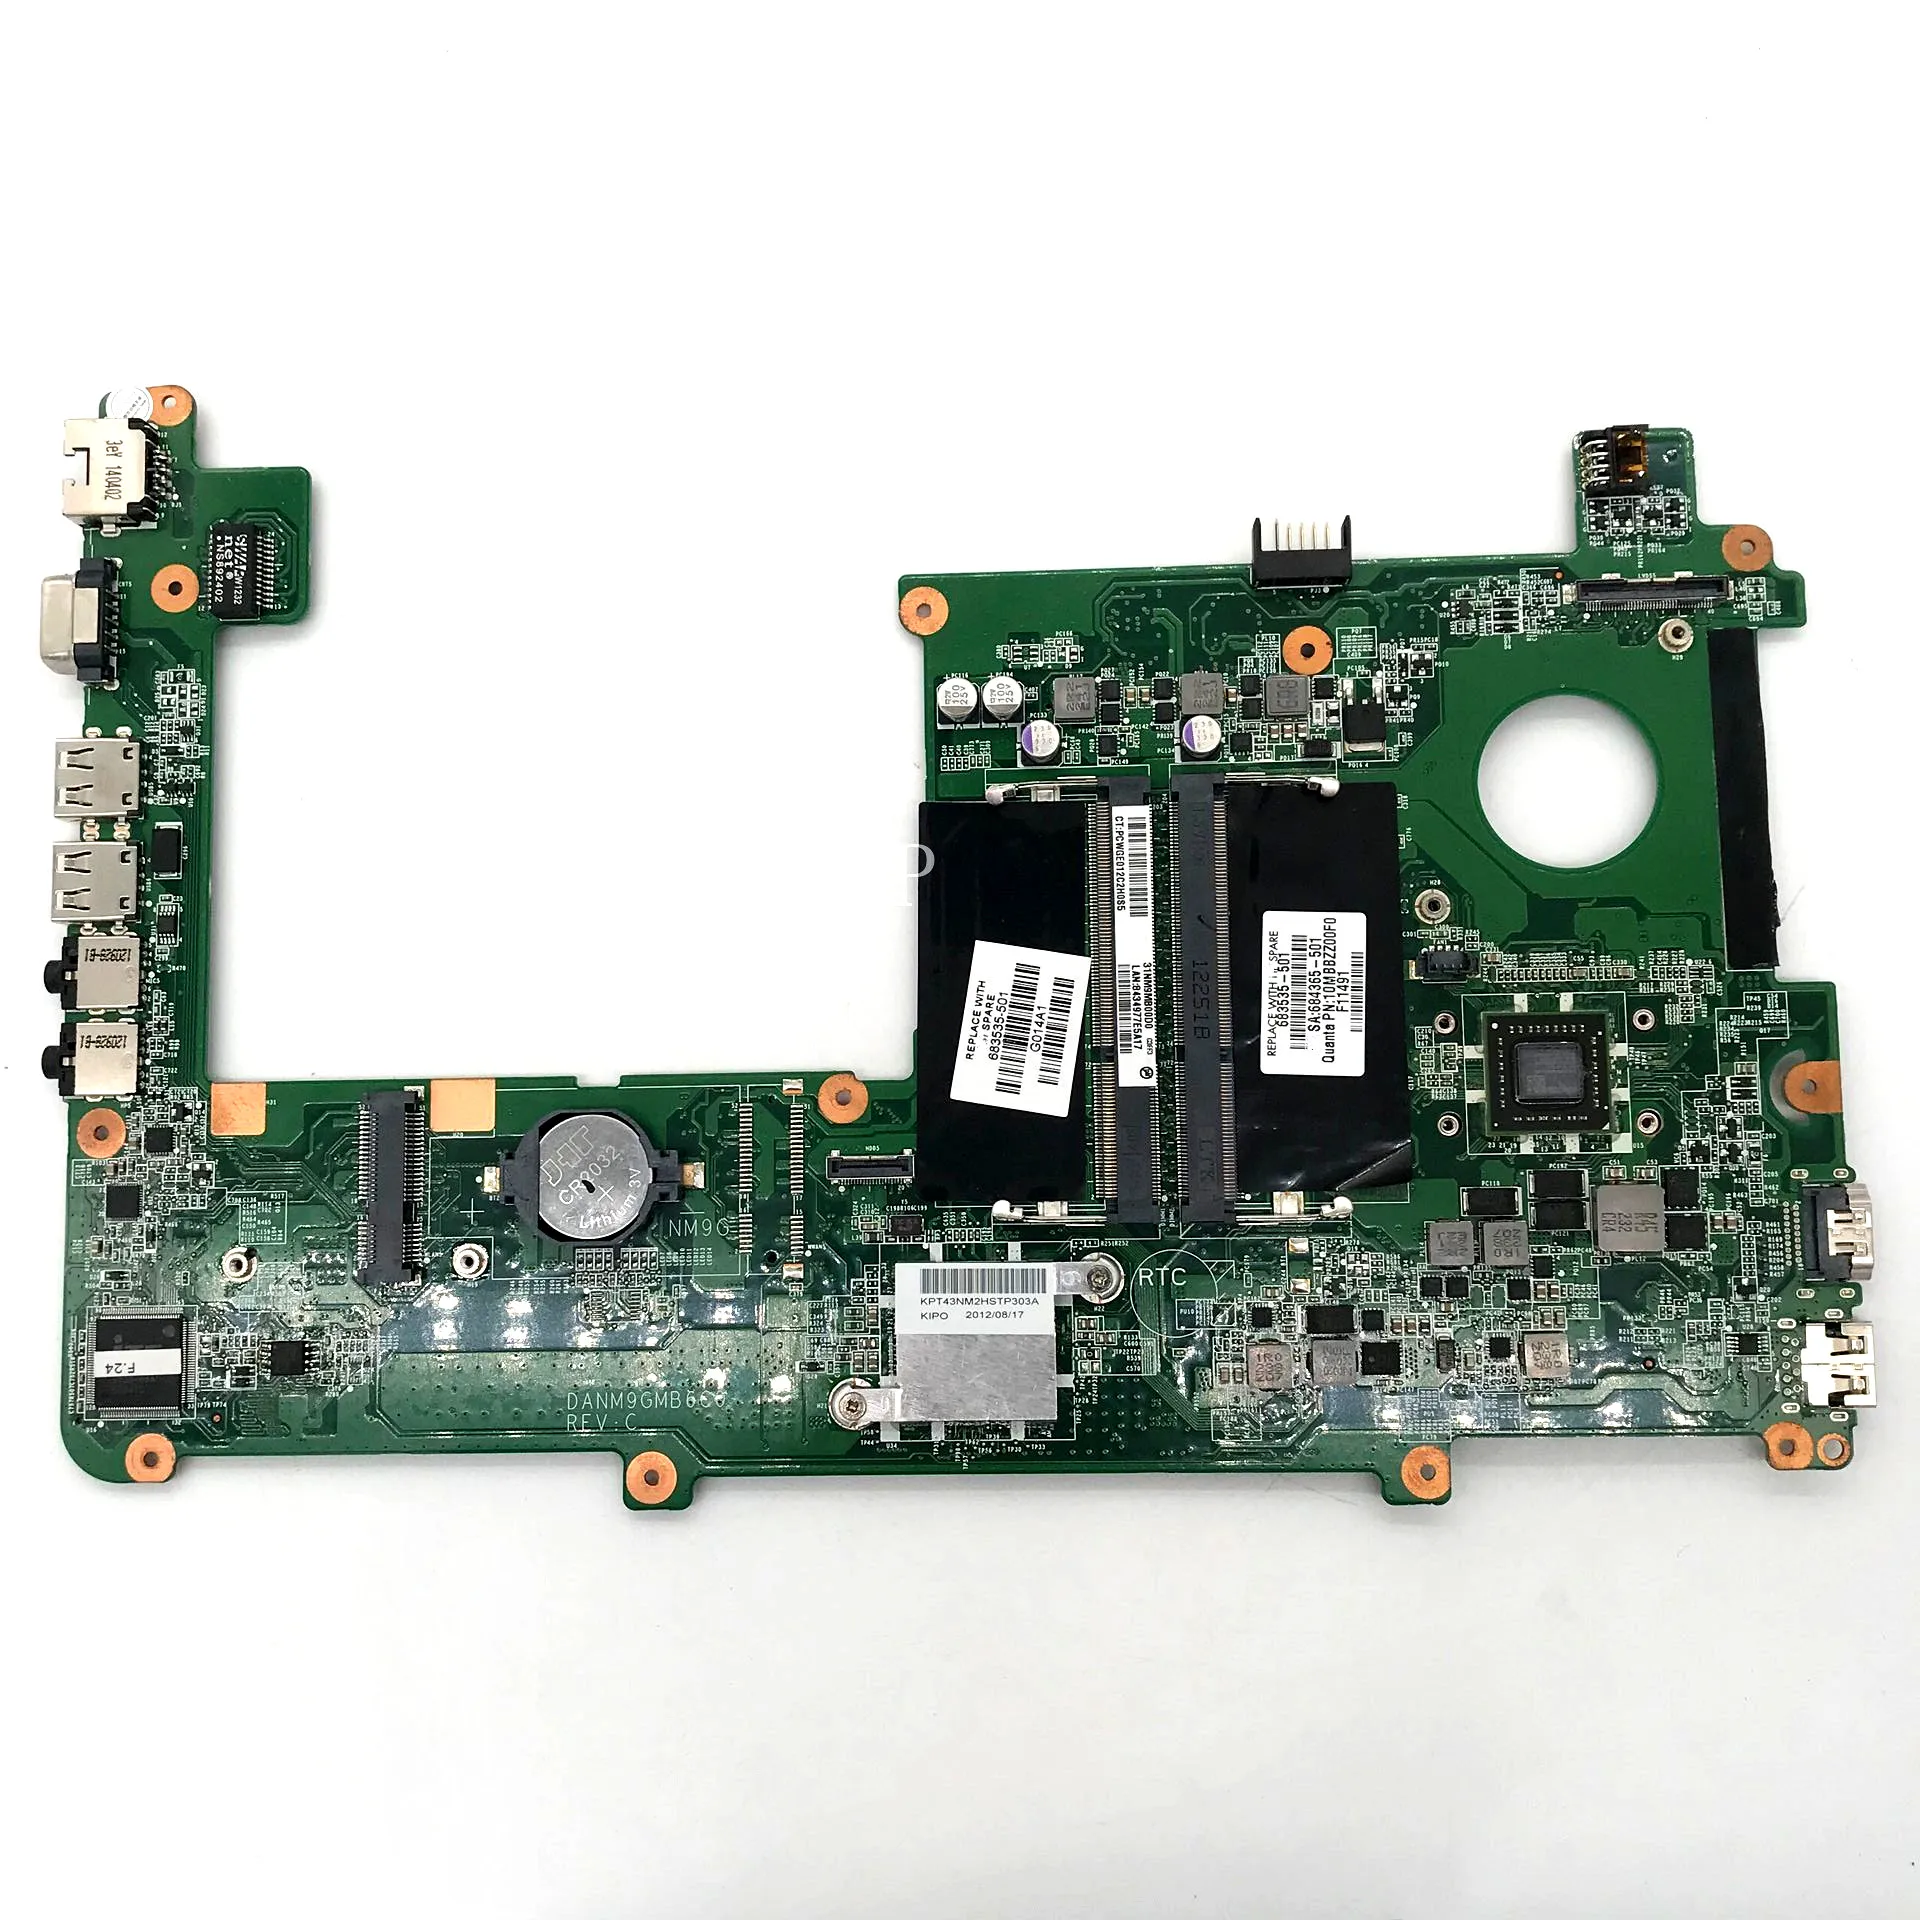 683535-501 683535-601 683535-001 High Quality Mainboard For HP DM1 DM1-4200 E450 DM1-4000 Laptop Motherboard DDR3 100% Tested OK